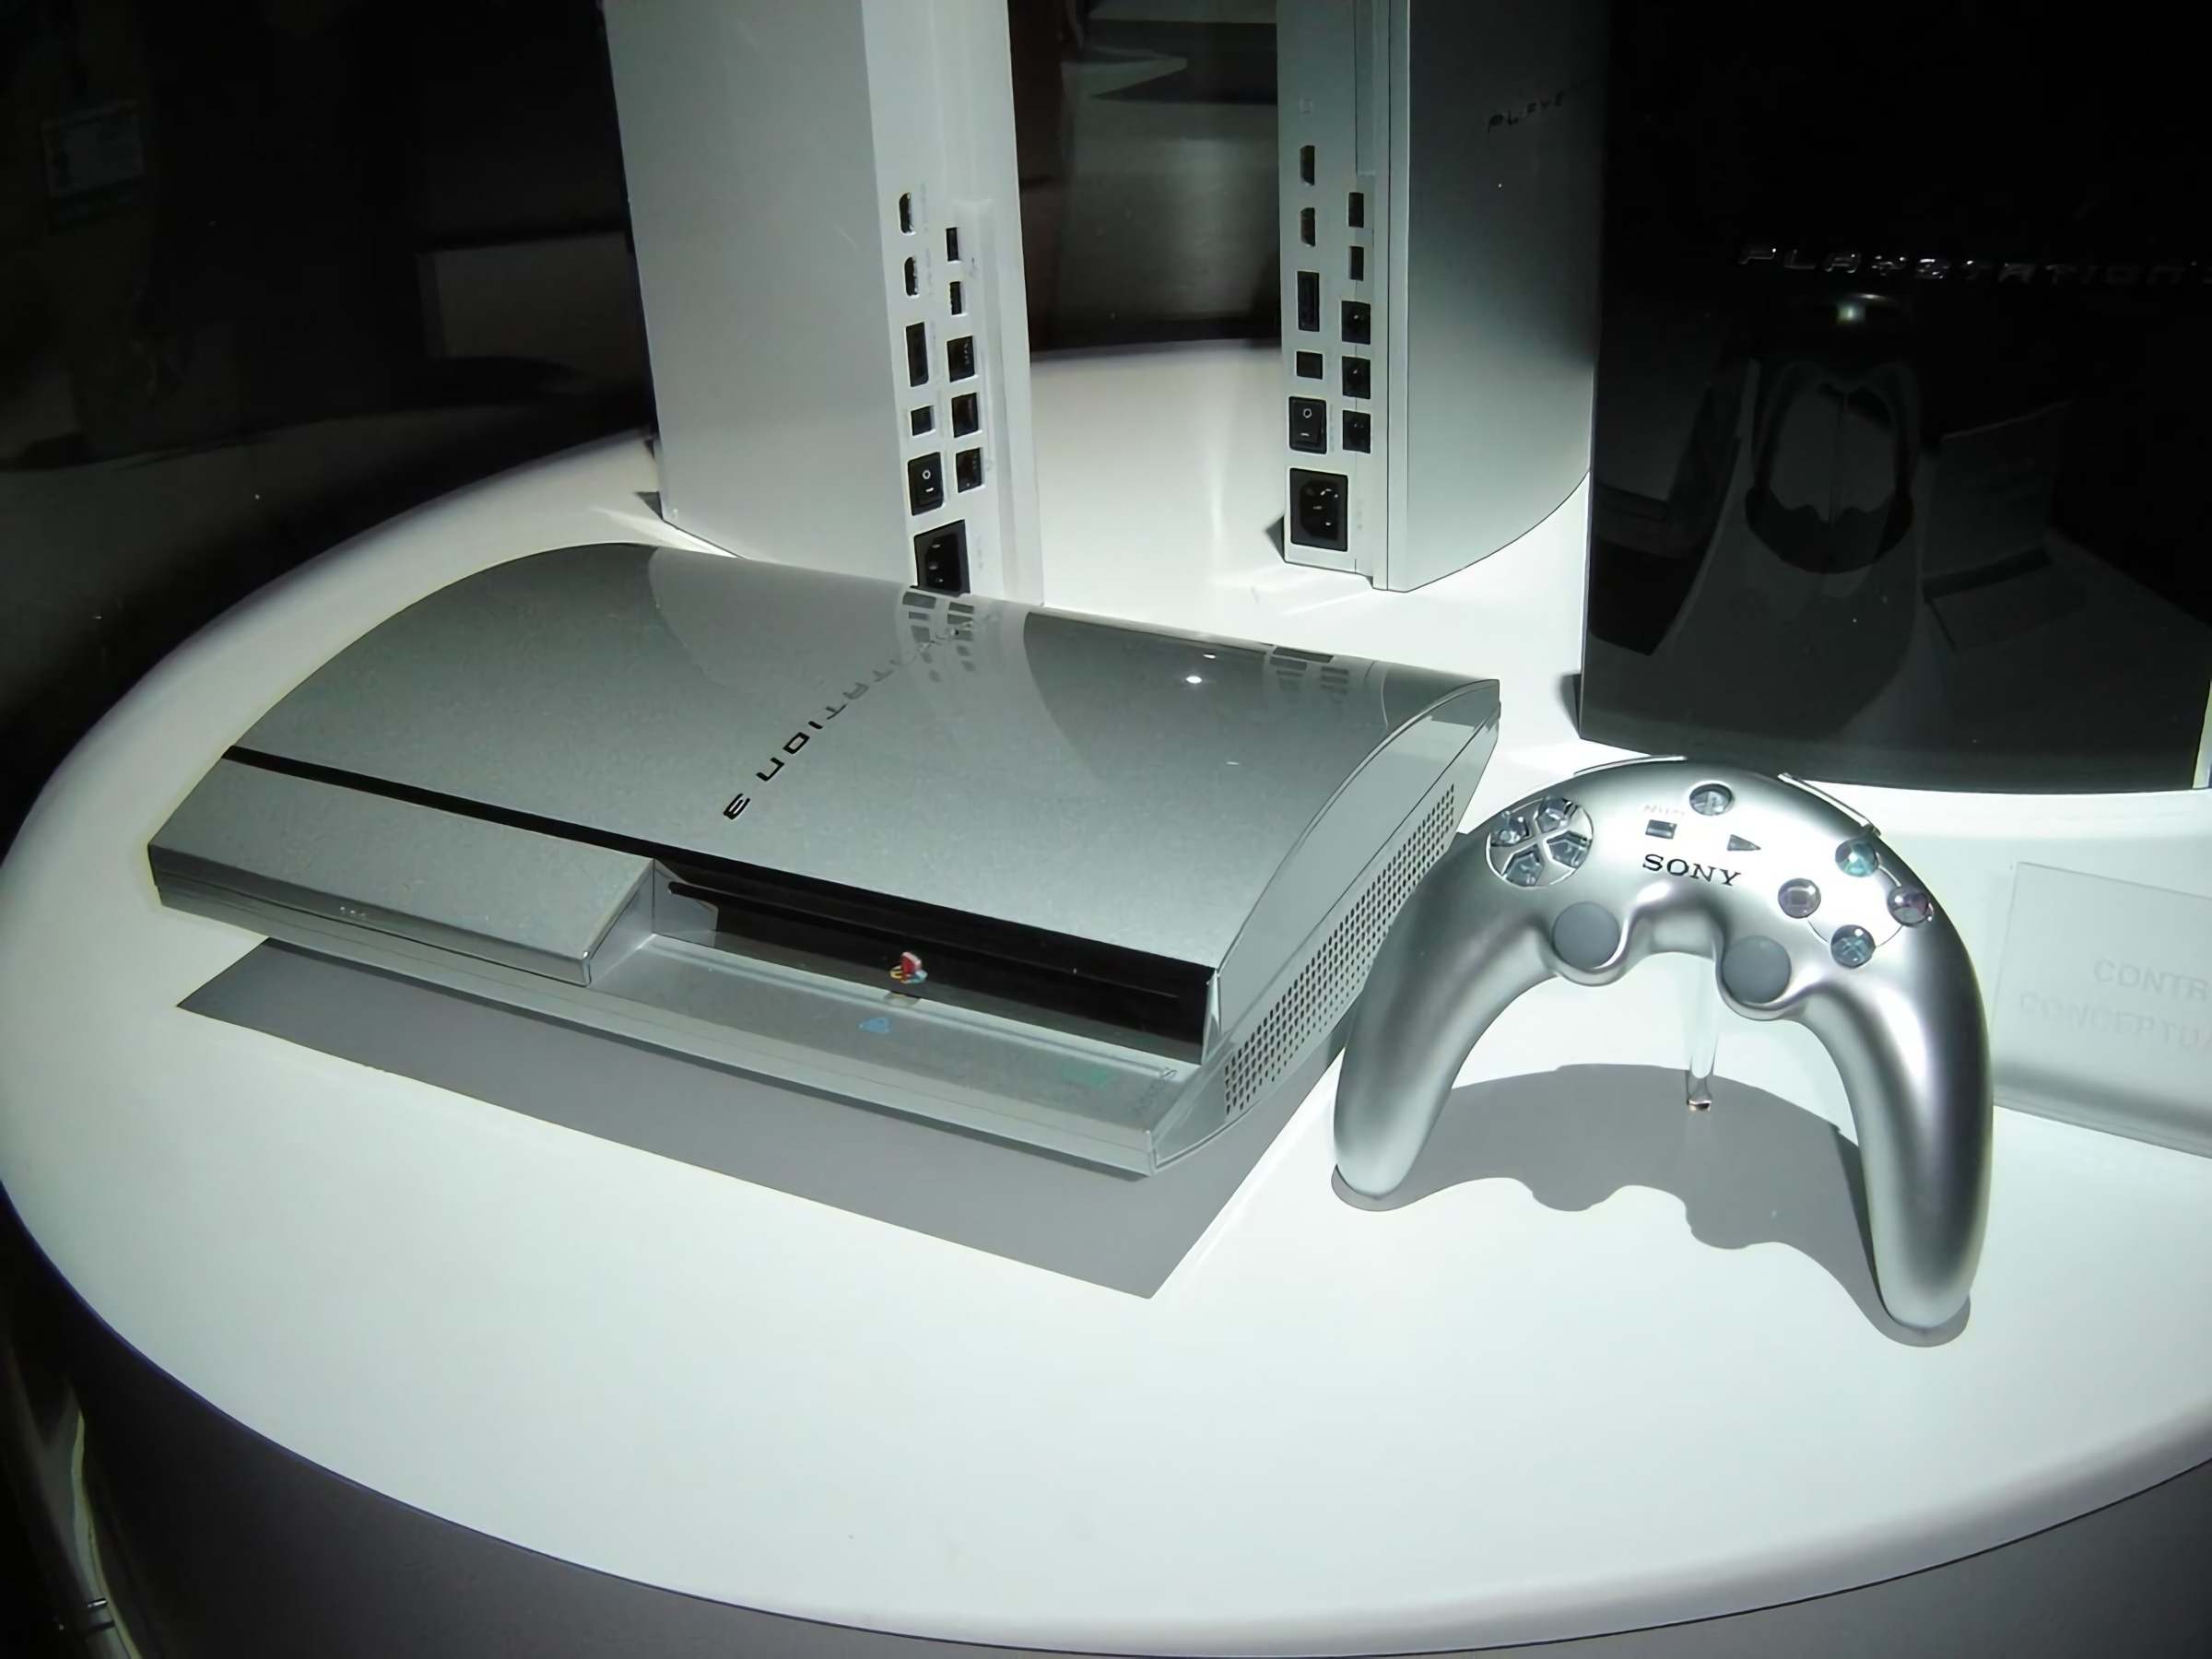 Ps5 2000a01. Sony ps3 Silver. PLAYSTATION 3 Console Prototype. Sony ps1 DEVKIT. Ps3 контроллер Бумеранг.